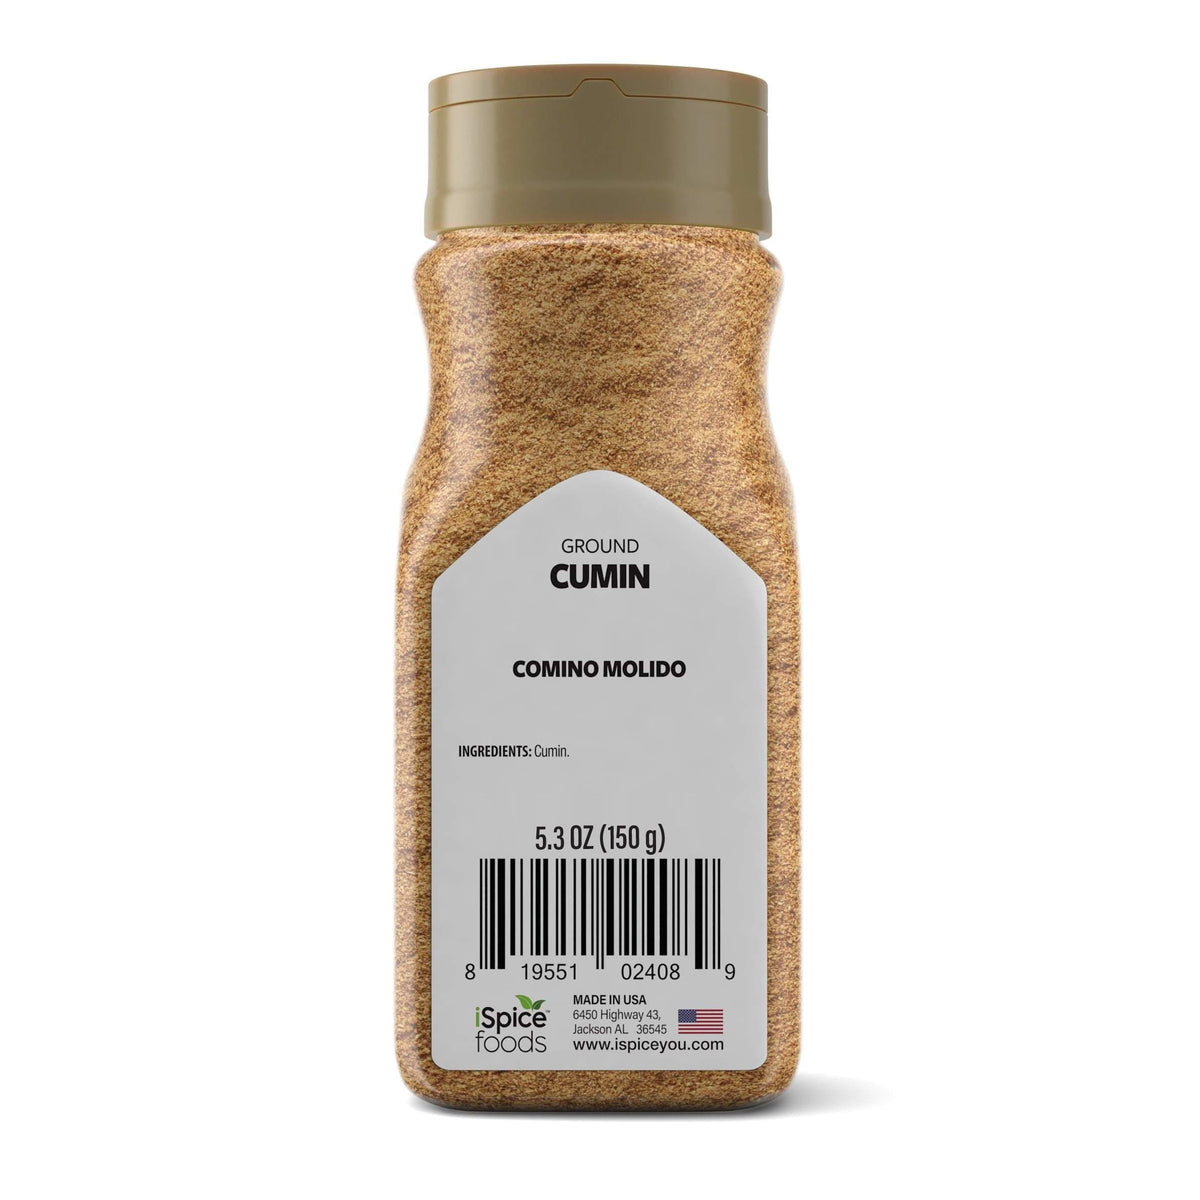 Quality cumin seeds from top producers around the world, available in bulk all year round. Get the best taste and aroma with these fresh cumin seeds!